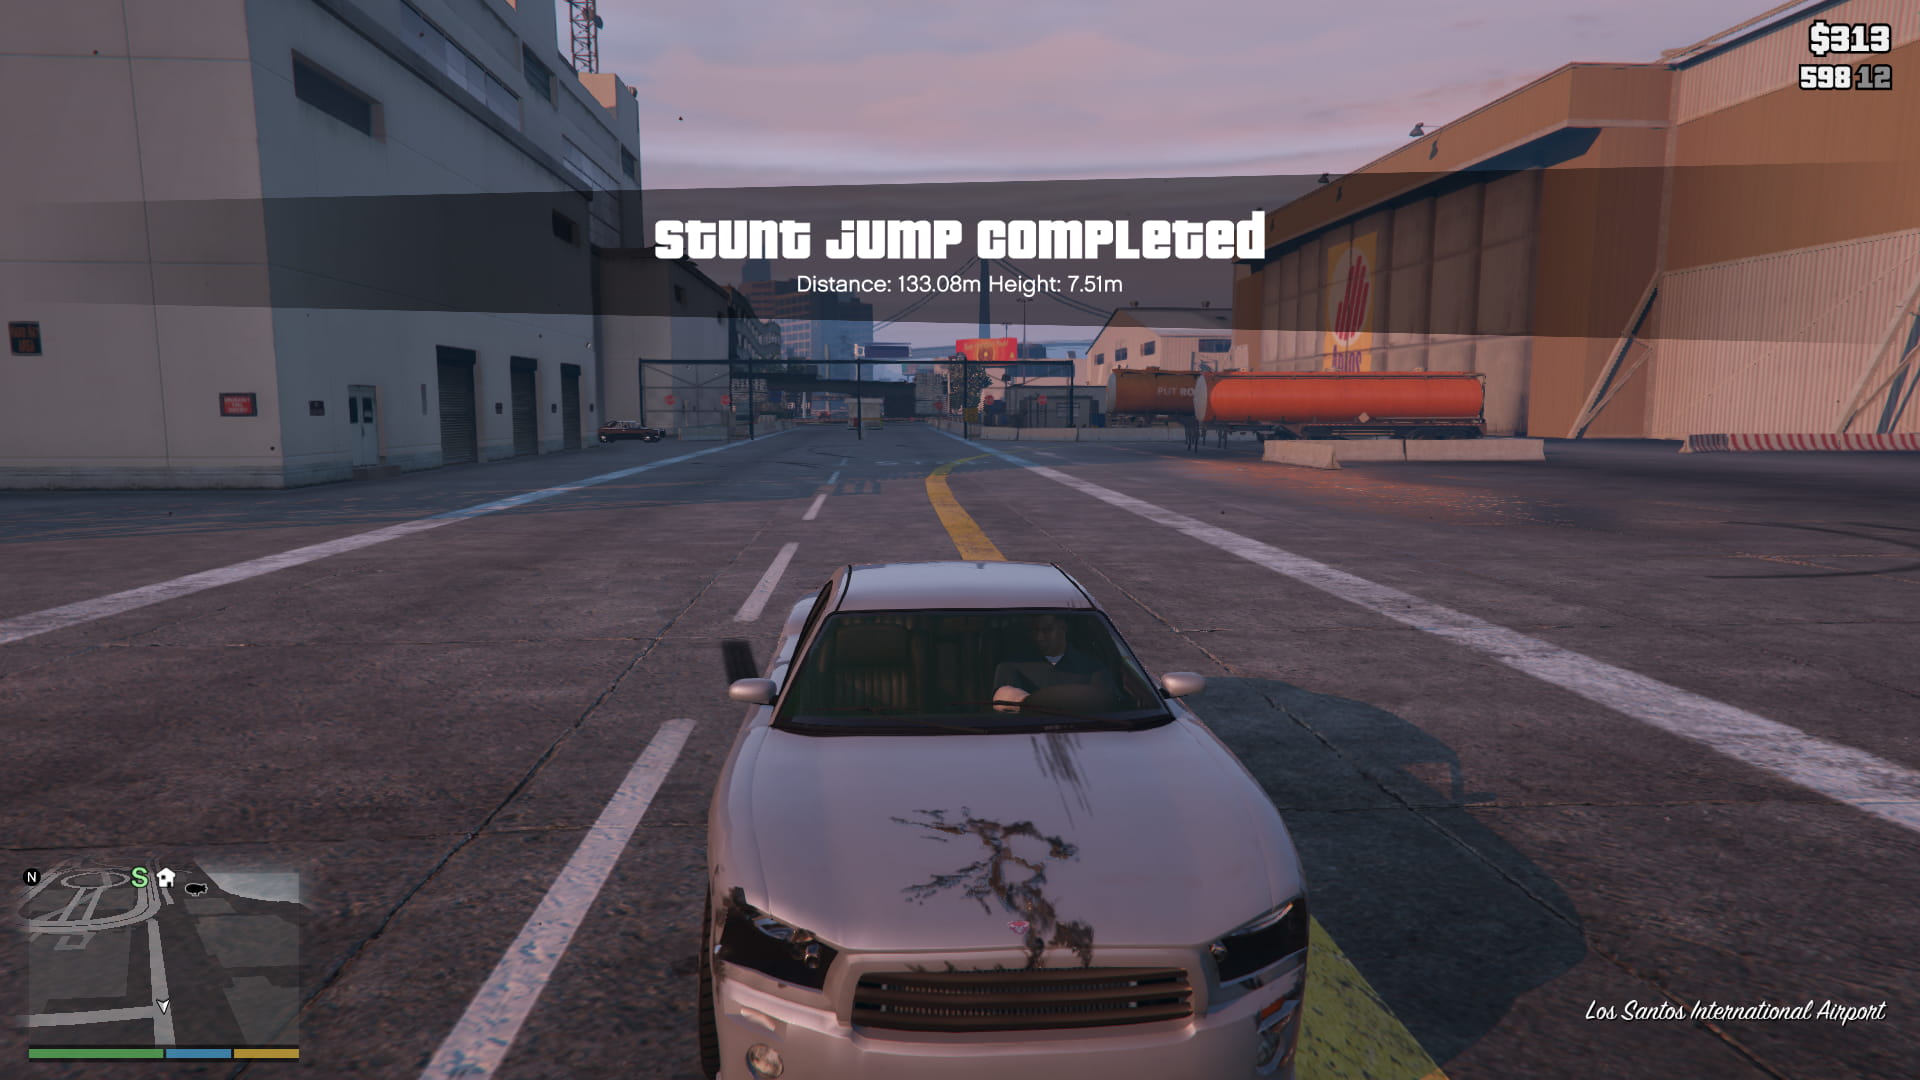 A picture of a completed airport jump, showing 'Stunt Jump Complete'